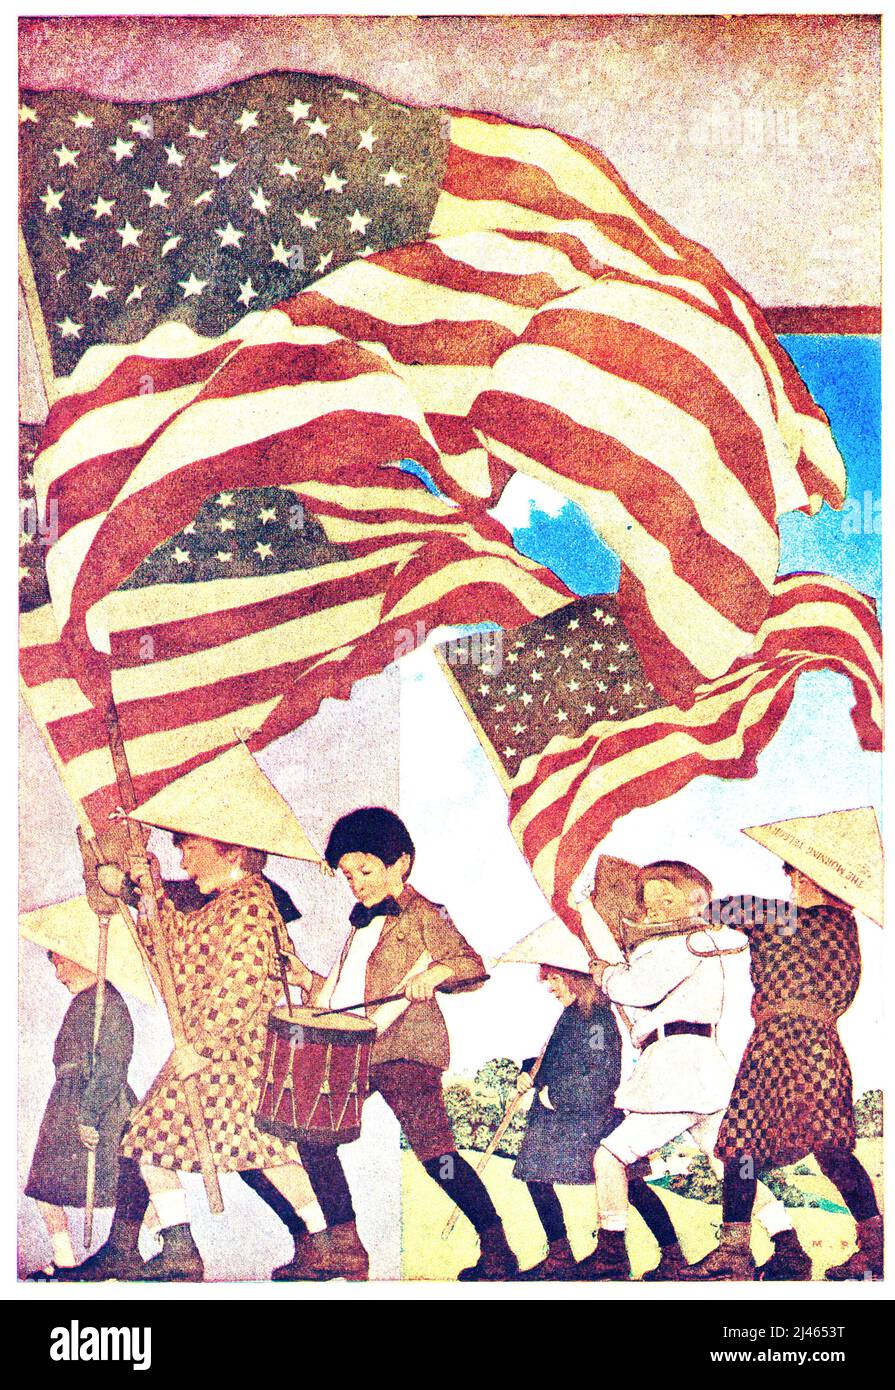 Maxfield Parrish - With Trumpet and Drum - Flag waving American children with drum and trumpet - 1904 Stock Photo